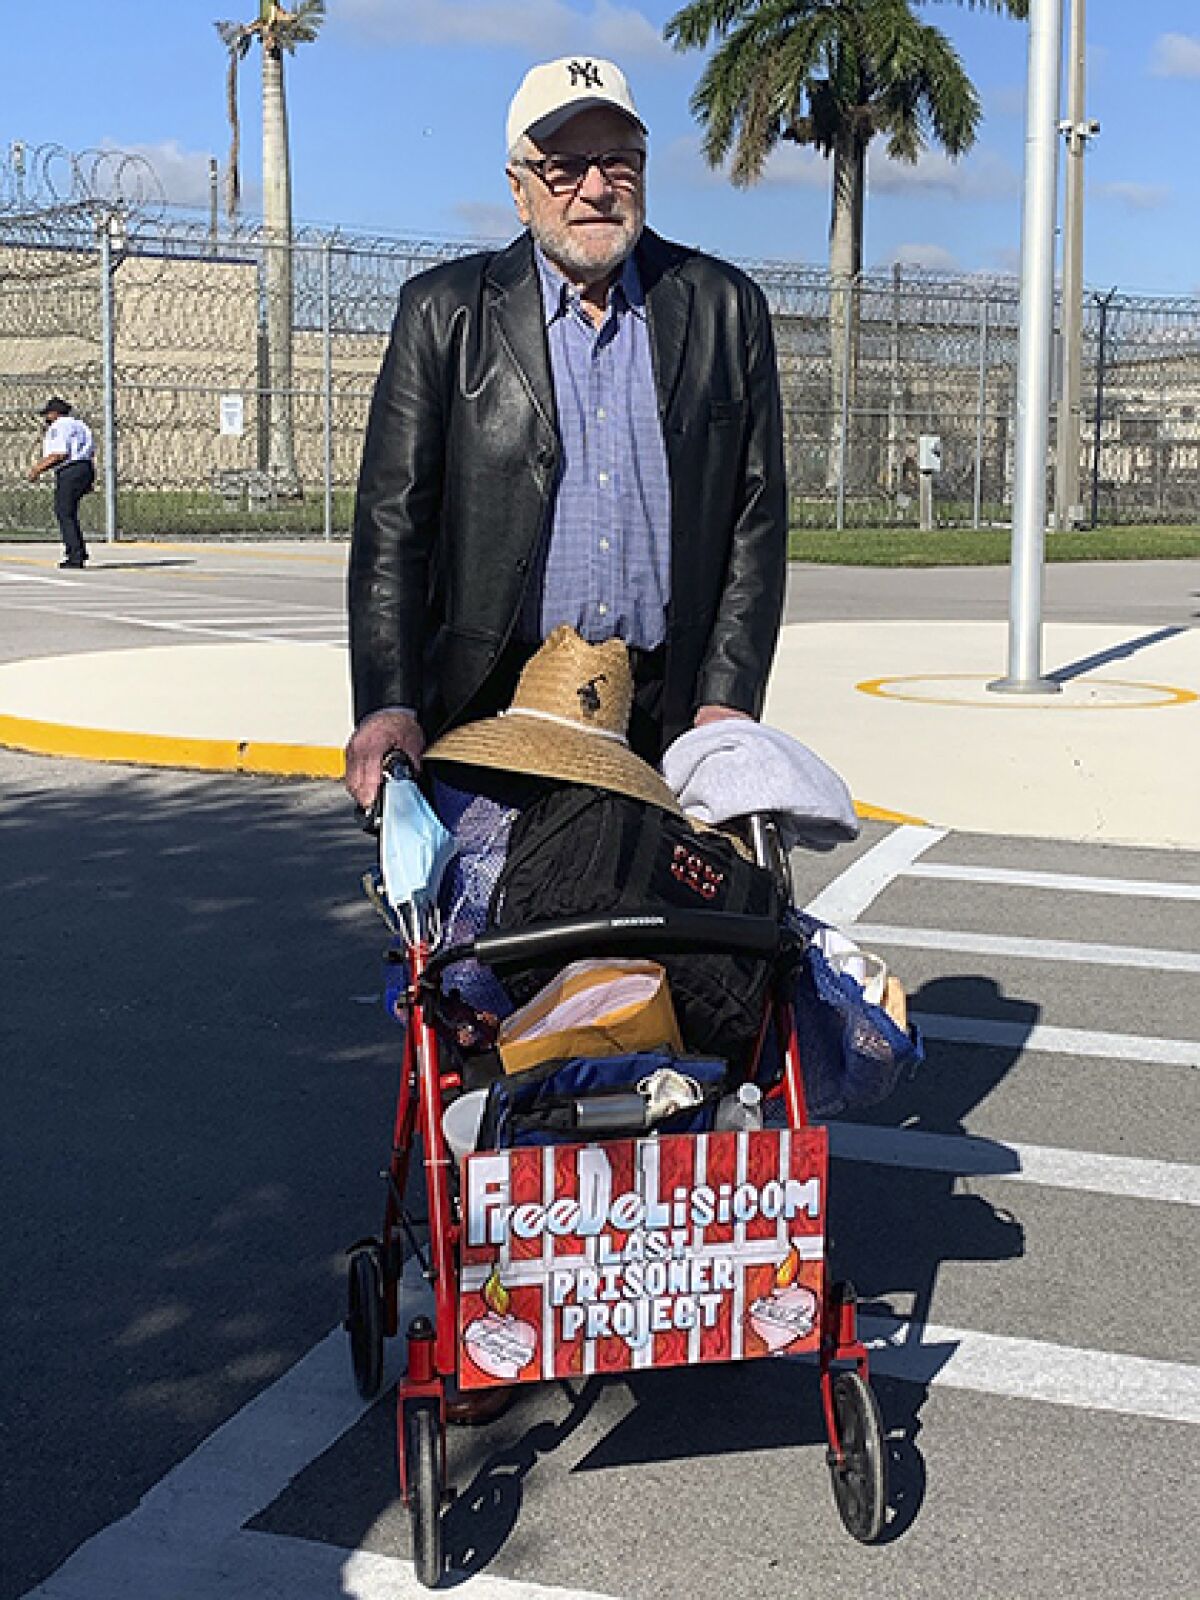 Richard DeLisi exits a Florida prison with his possessions on Tuesday.